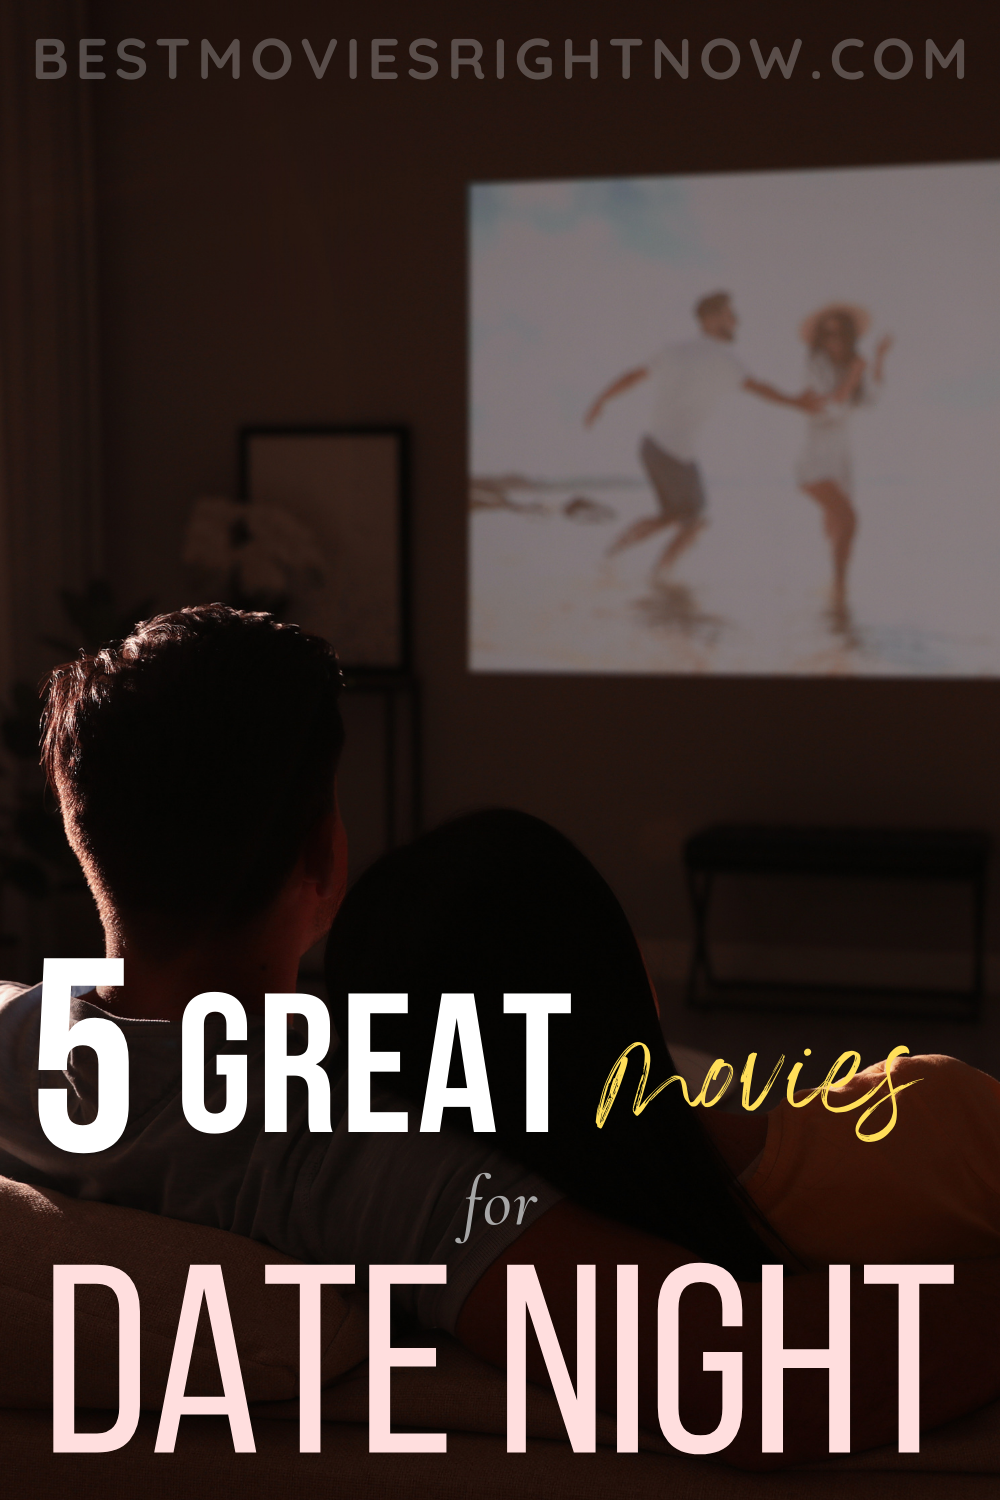 sweet couple watching movie with text: "Great Date Night Movies"